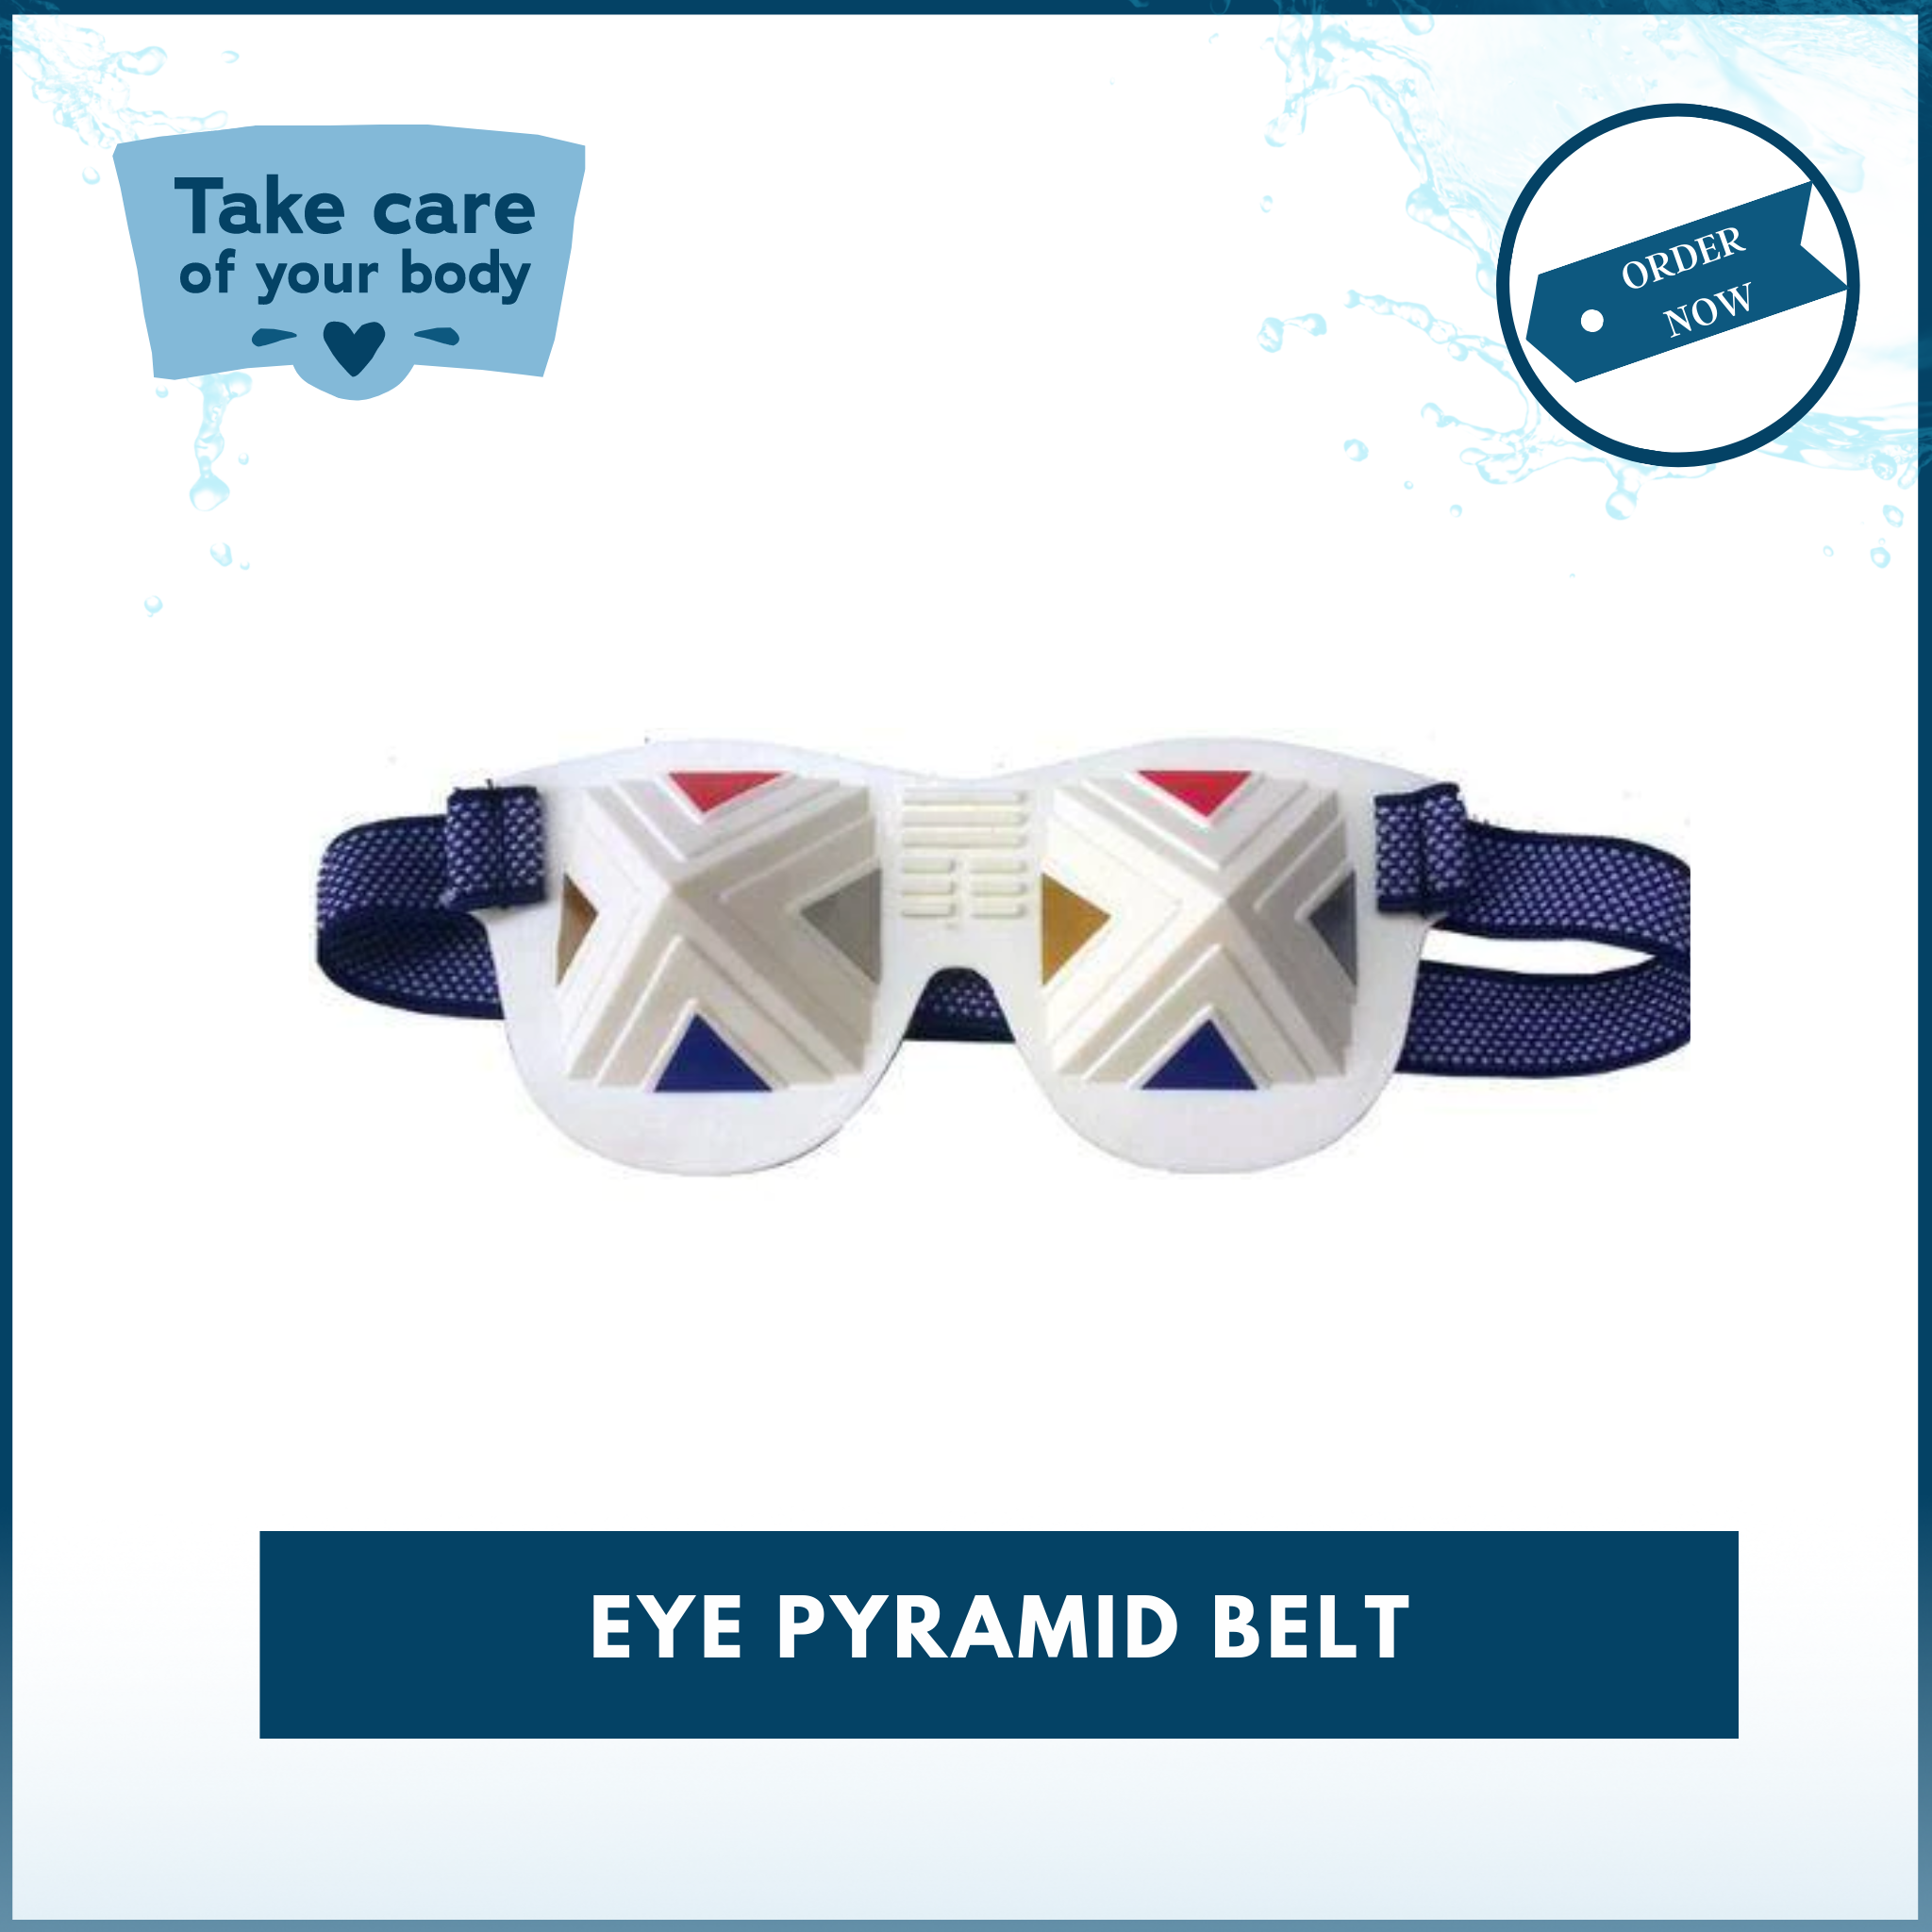 HealingCombo 1 - Eye Pyramid Multi Energy Eye Care + Head Belt With Copper Pyramid for Natural Eye & Head Healing & Relaxation - 0